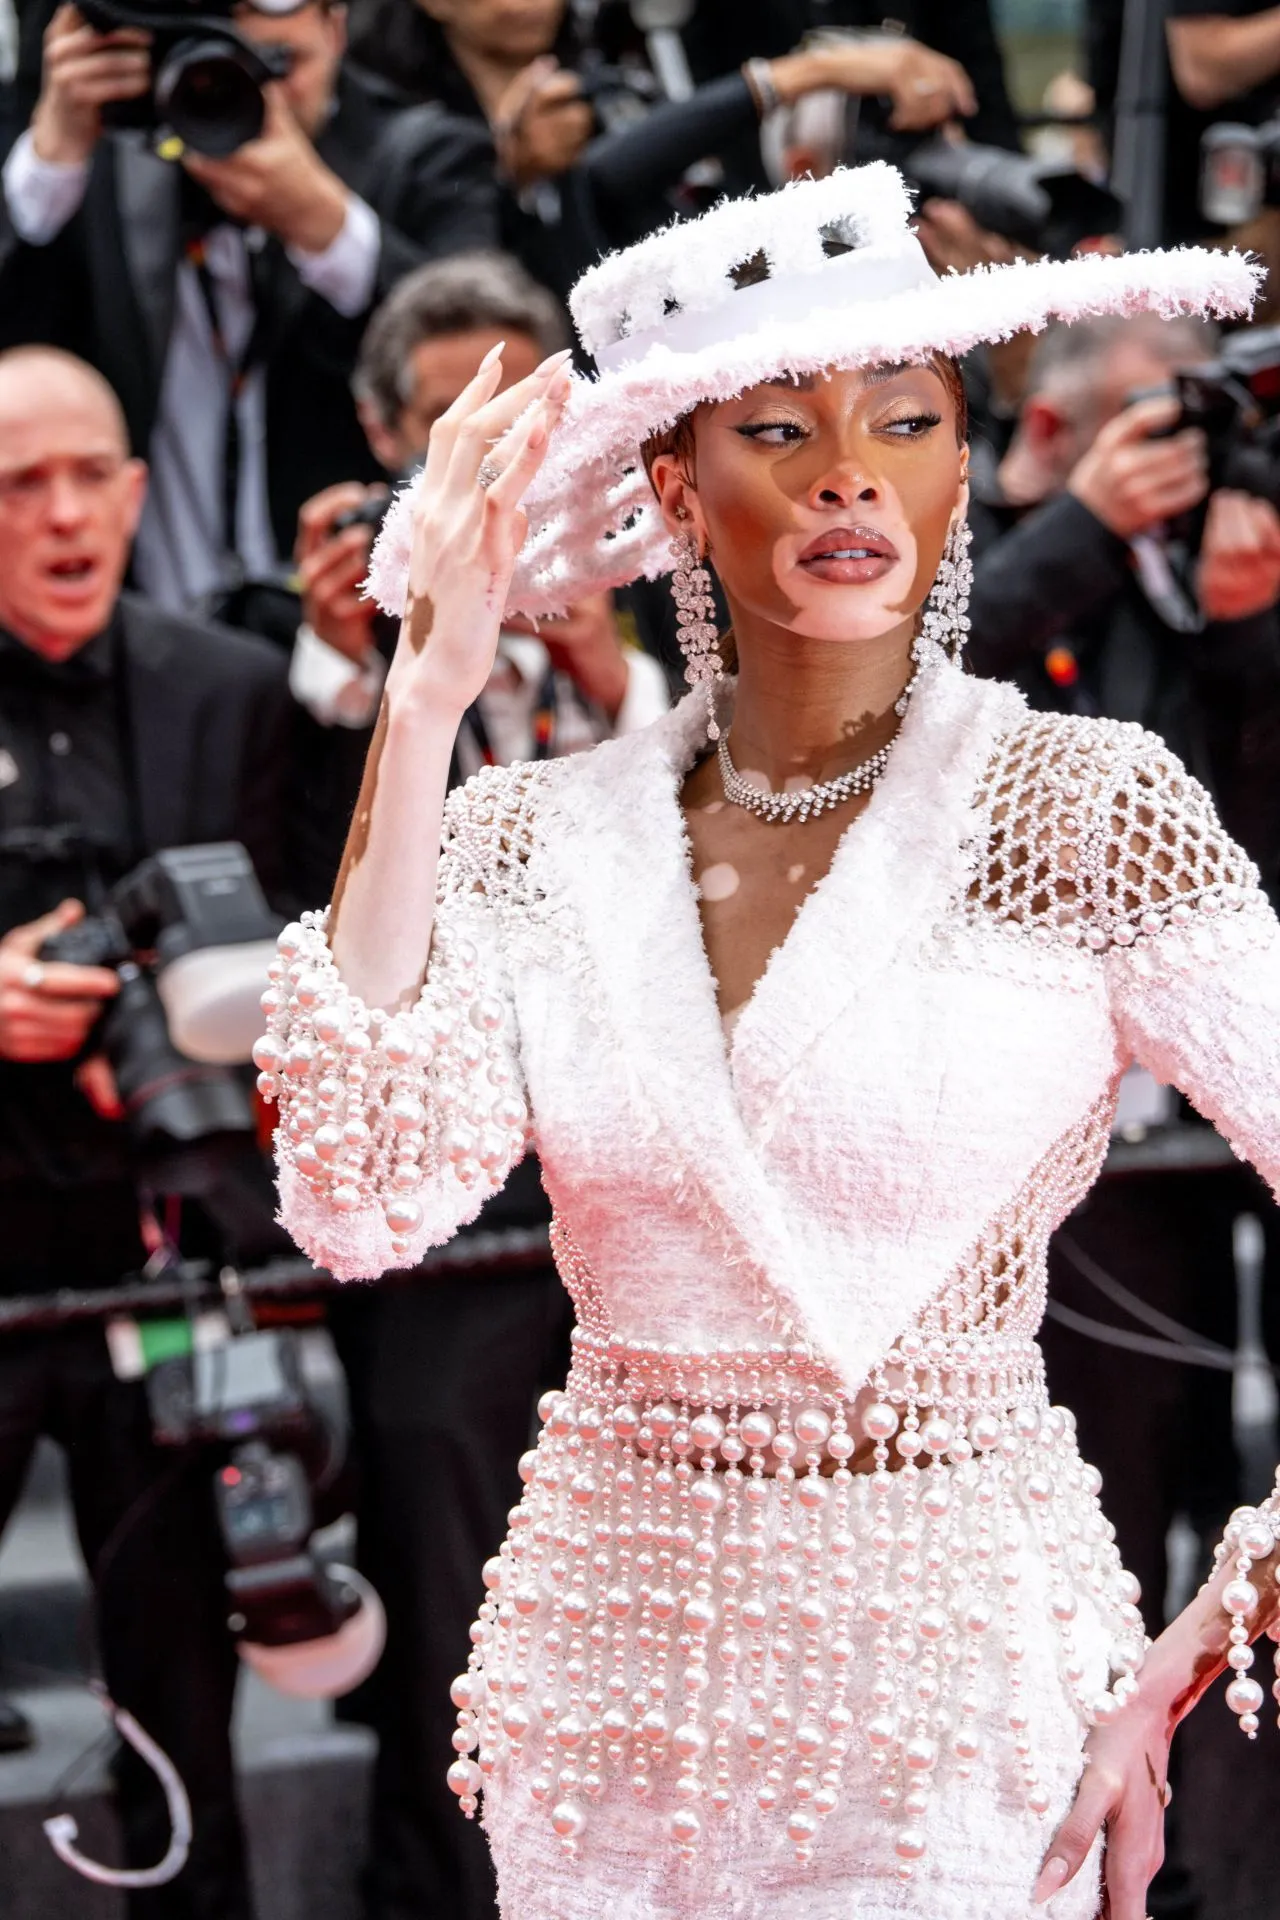 WINNIE HARLOW AT THE APPRENTICE PREMIERE AT CANNES FILM FESTIVAL